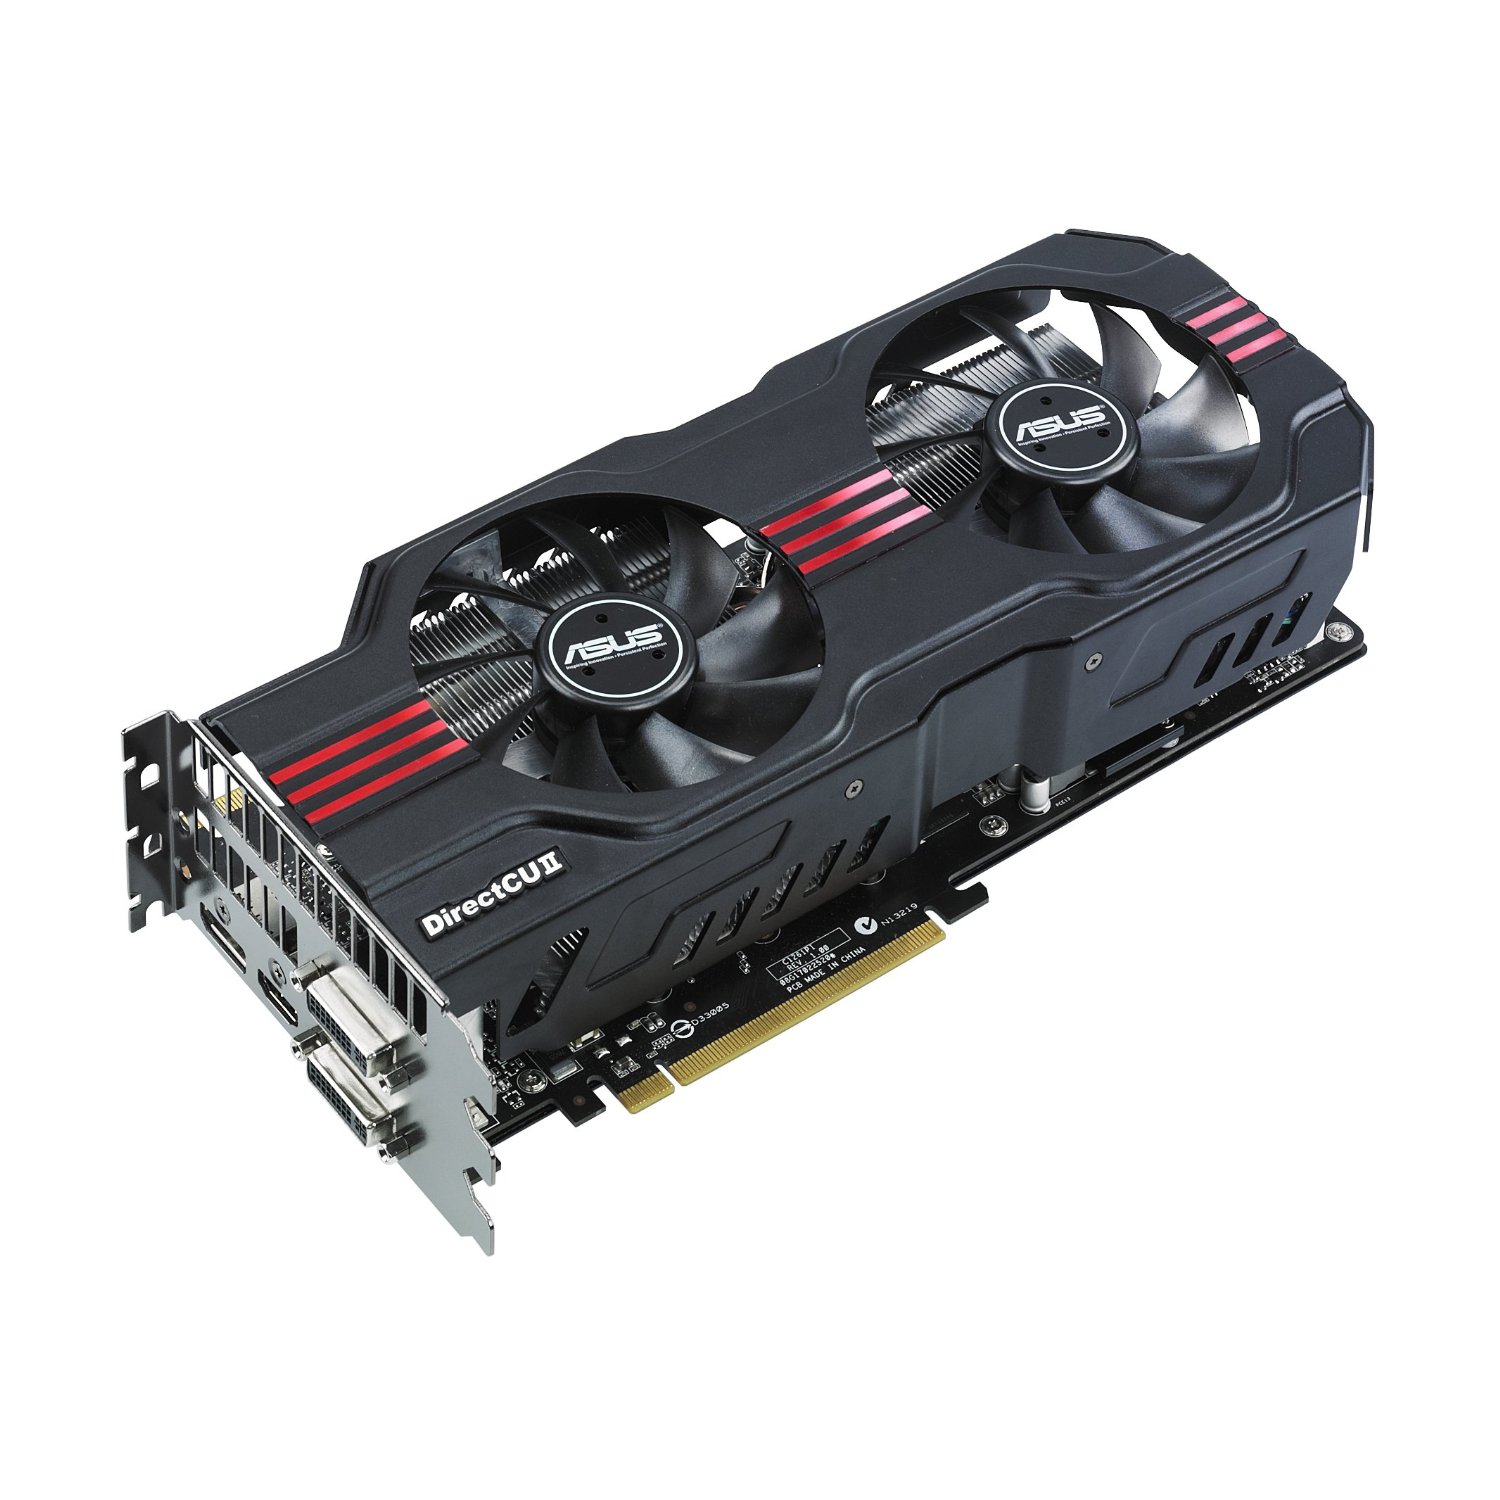 ASUS GTX580 DCII with 782MHz Factory Overclocked and Dual Fan DirectCU Fansink Video Card ENGTX580 DCII/2DIS/1536MD5